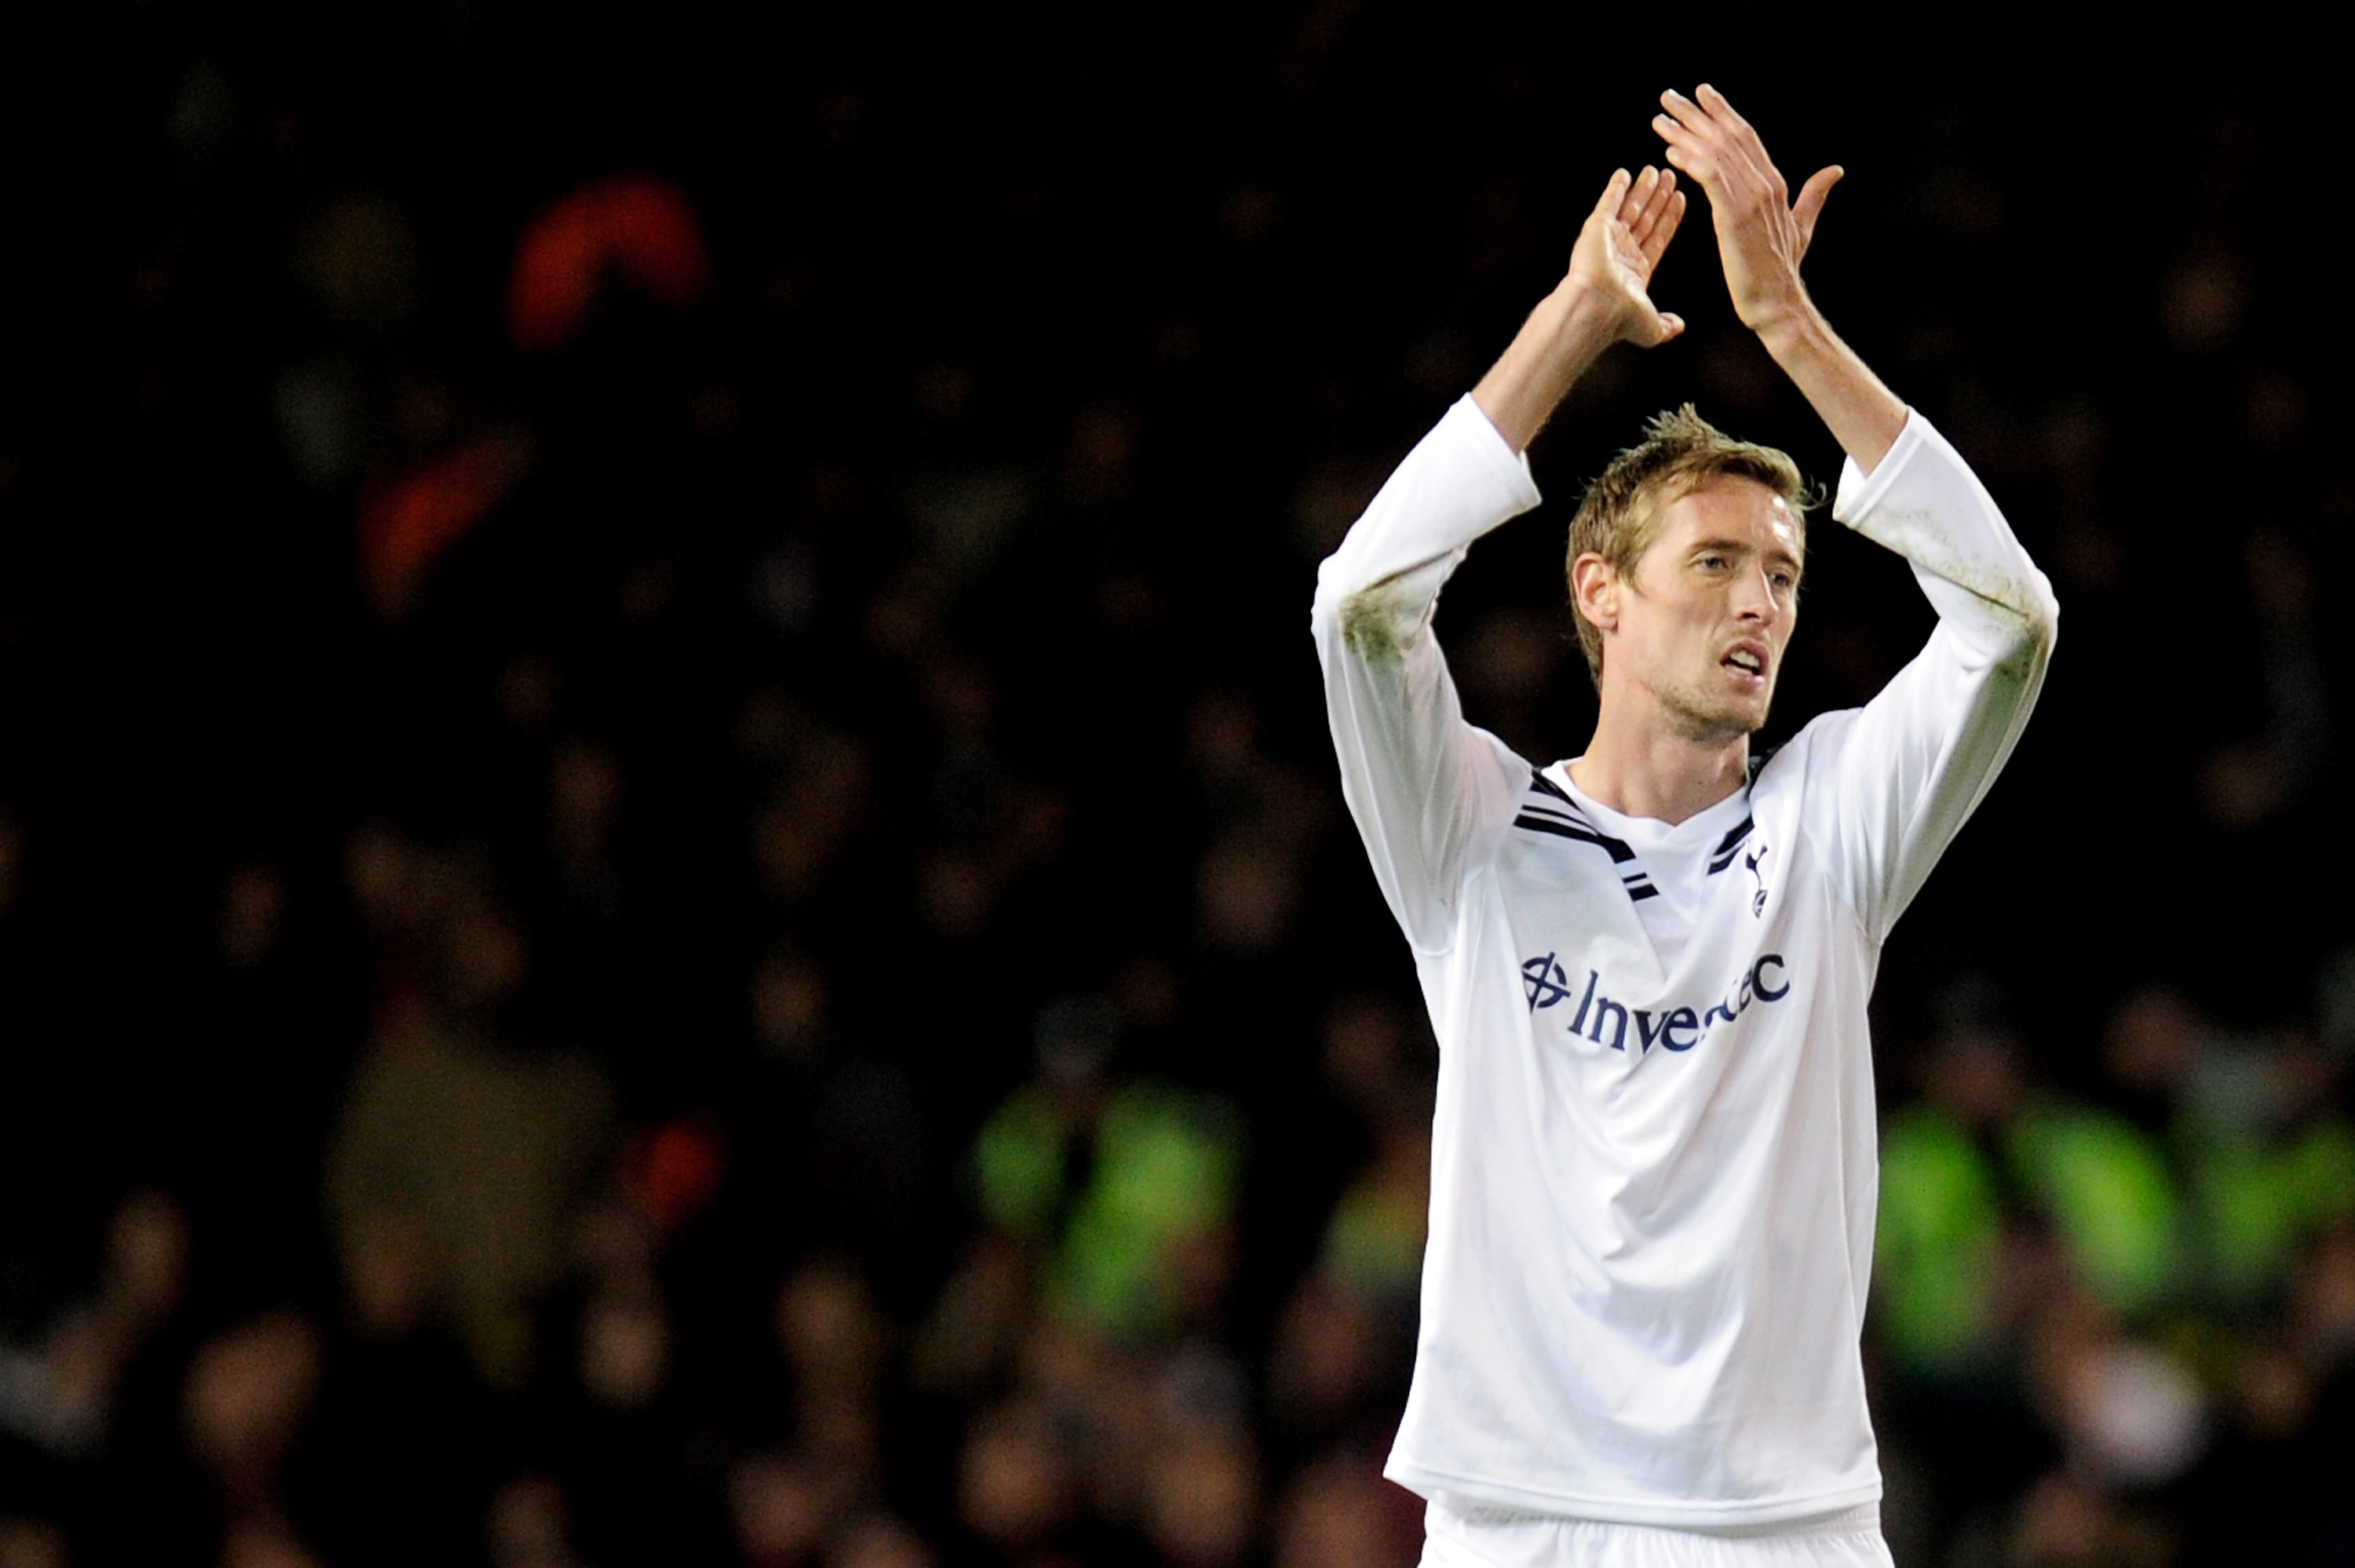 LONDON, ENGLAND - MARCH 09:  Peter Crouch of Tottenham applauds the crowd during the UEFA Champions League round of 16 second leg match between Tottenham Hotspur and AC Milan at White Hart Lane on March 9, 2011 in London, England.  (Photo by Jamie McDonal